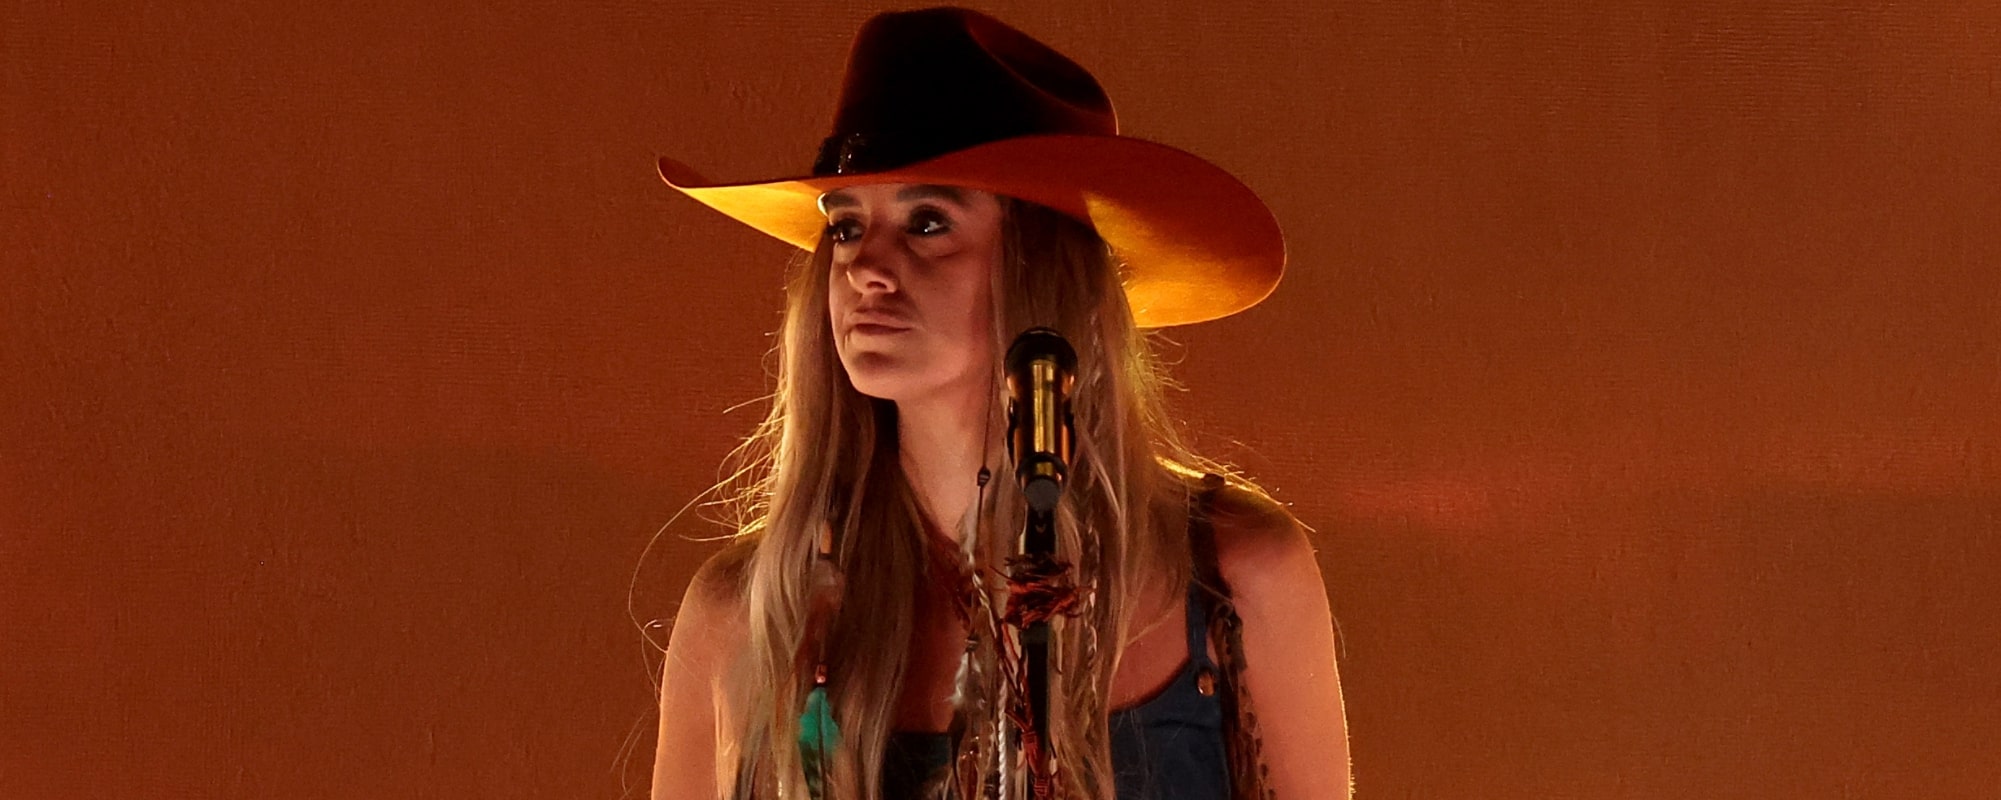 Lainey Wilson Brings an Intense Rendition of “Wildflowers and Wild Horses” to ‘Jimmy Kimmel Live’